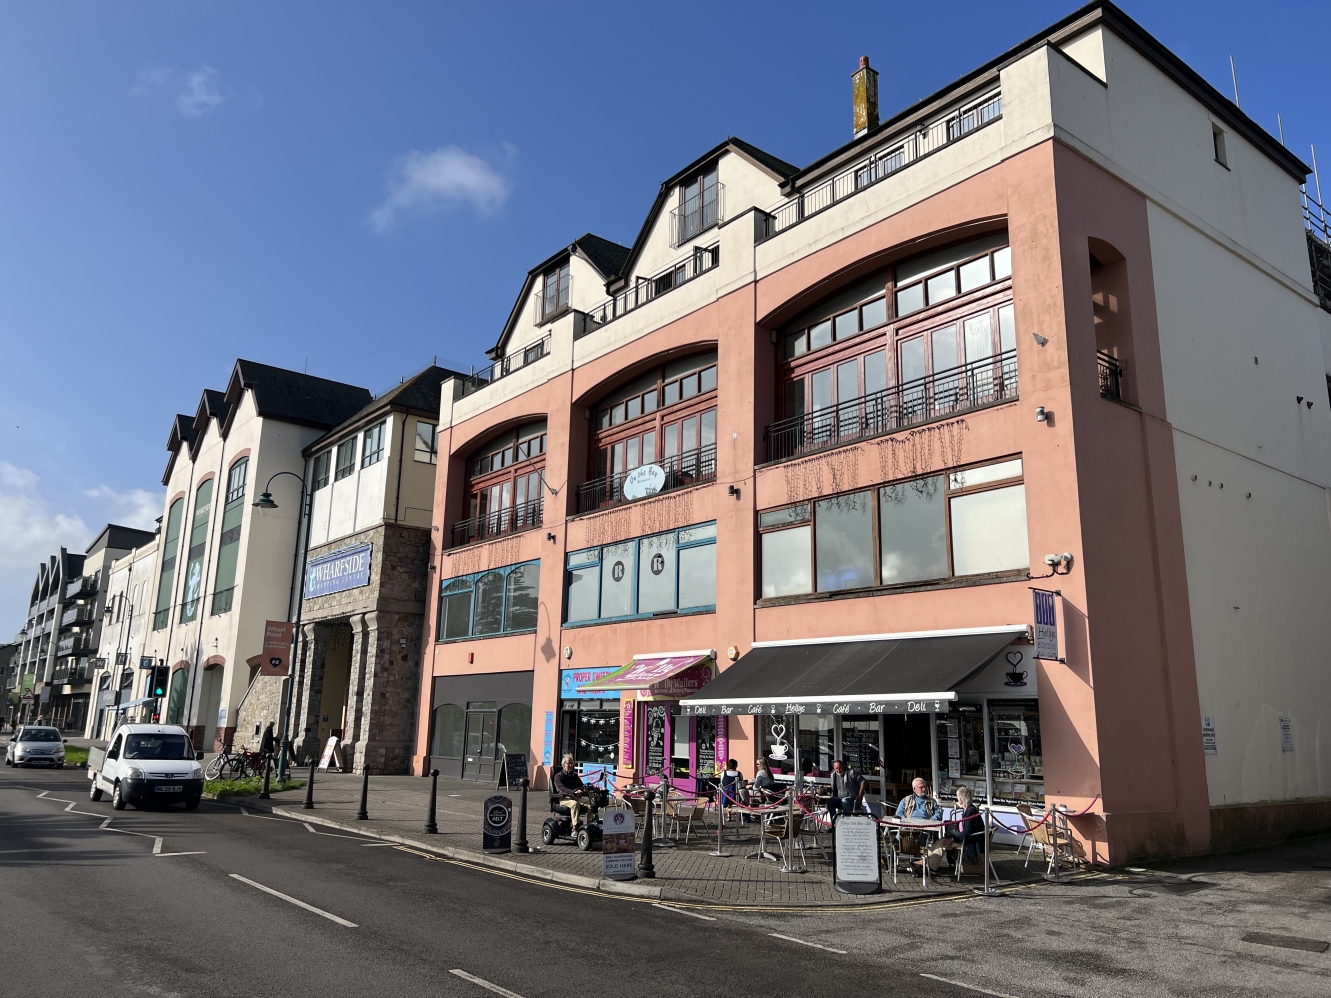 Retail Property (High Street) for rent in Penzance. From Miller Commercial - Commercial